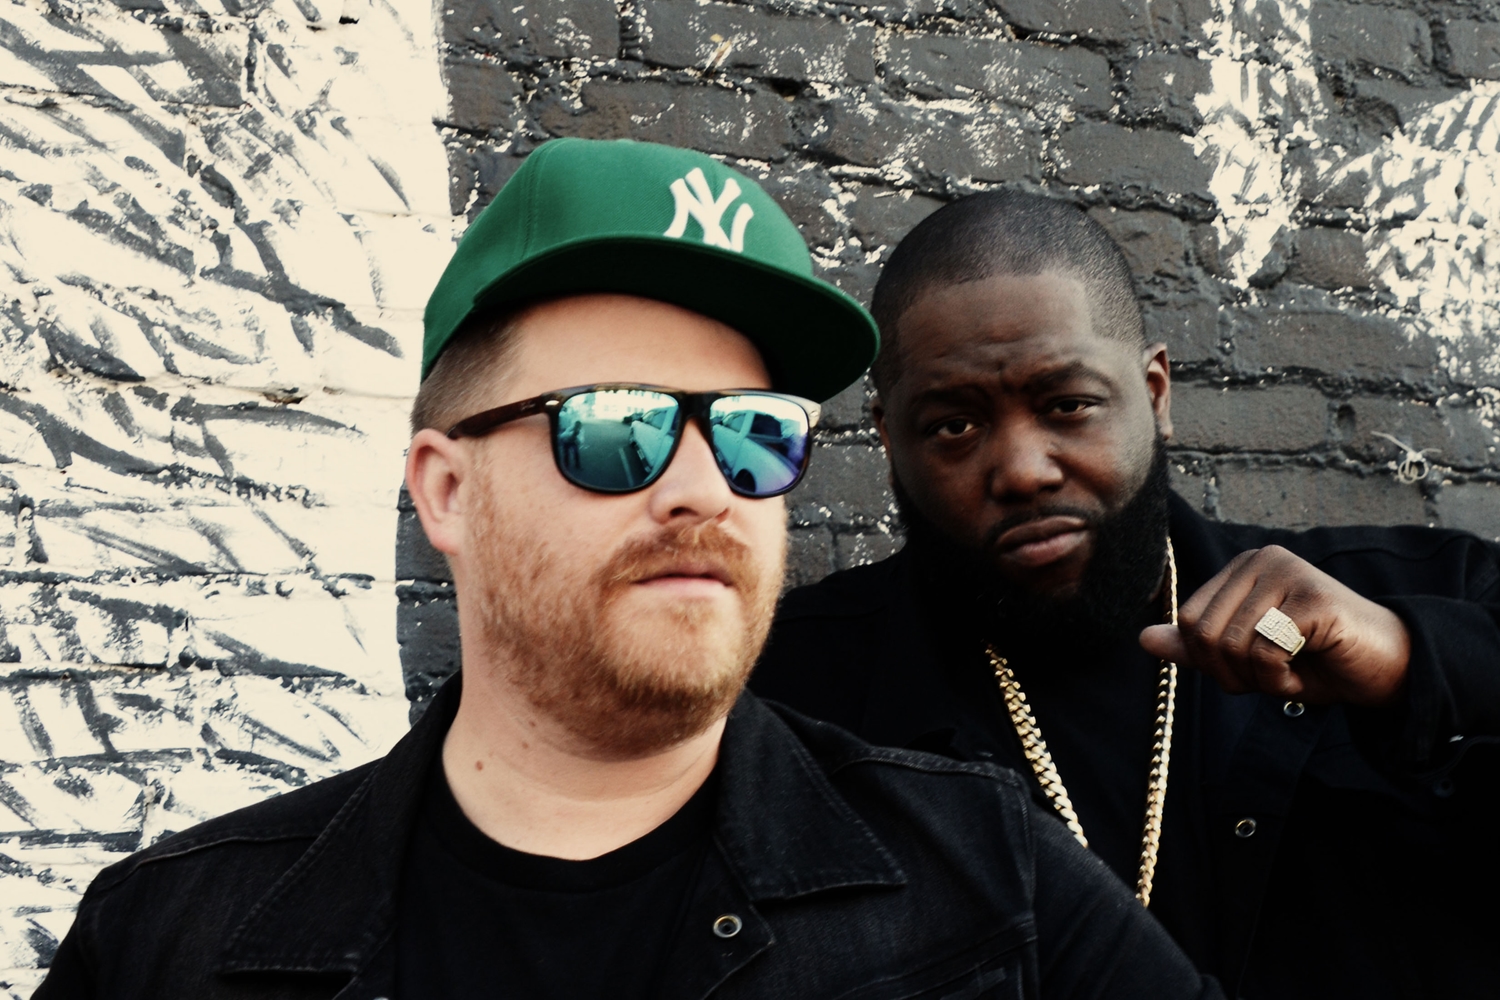 Hold up! It's Run the Jewels